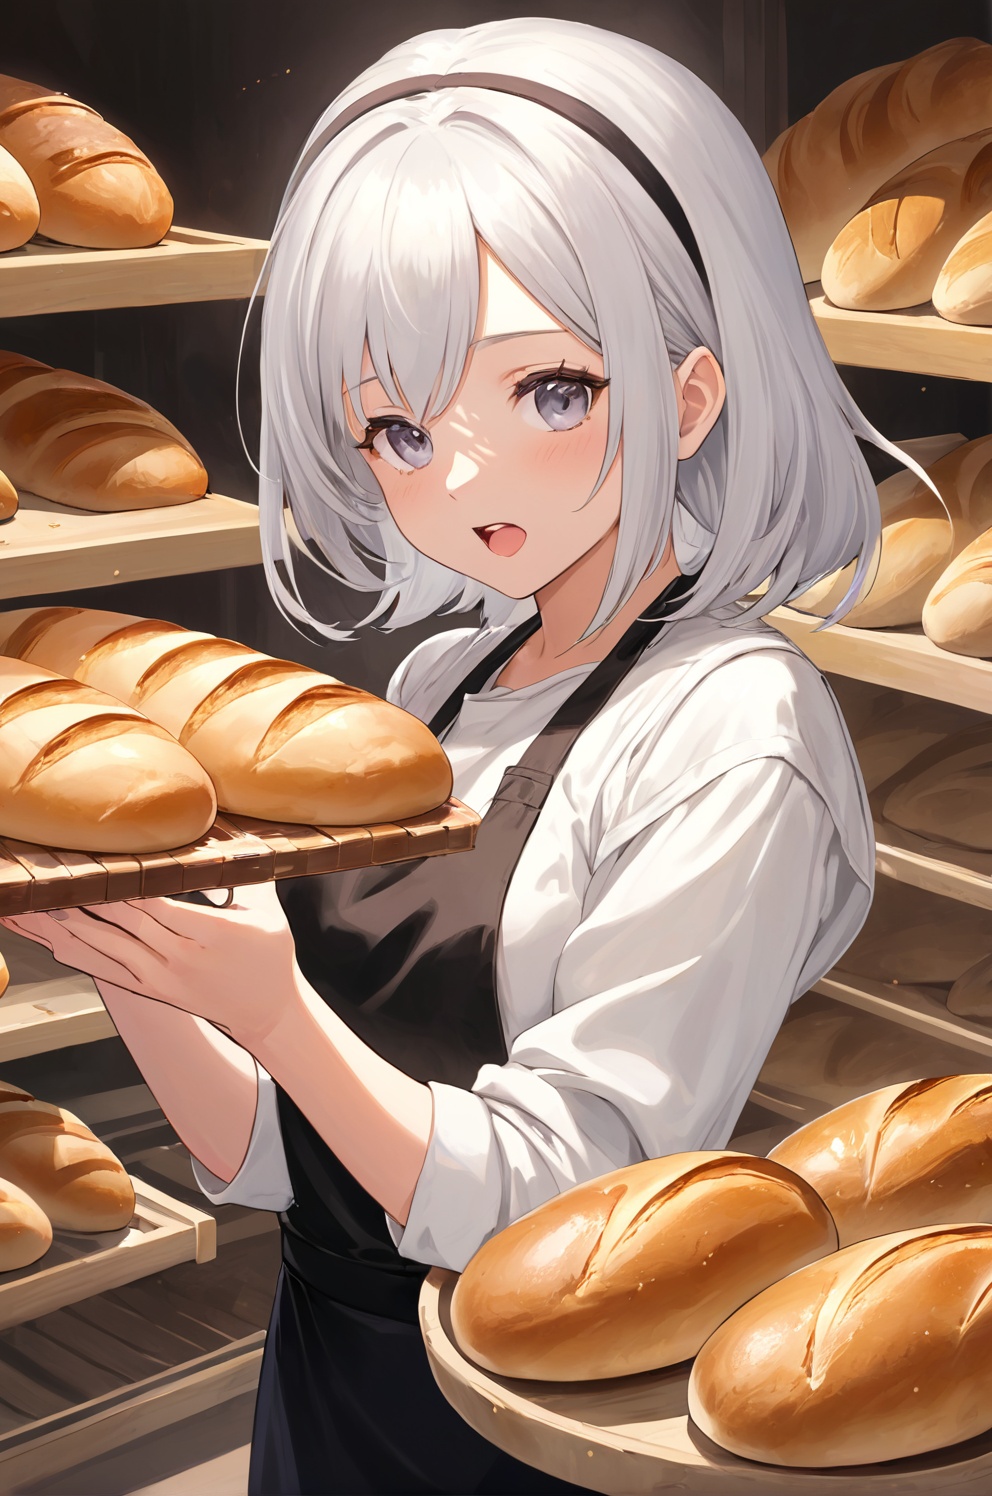 Watch as a cute anime girl joyfully bakes cookies in her cozy kitchen